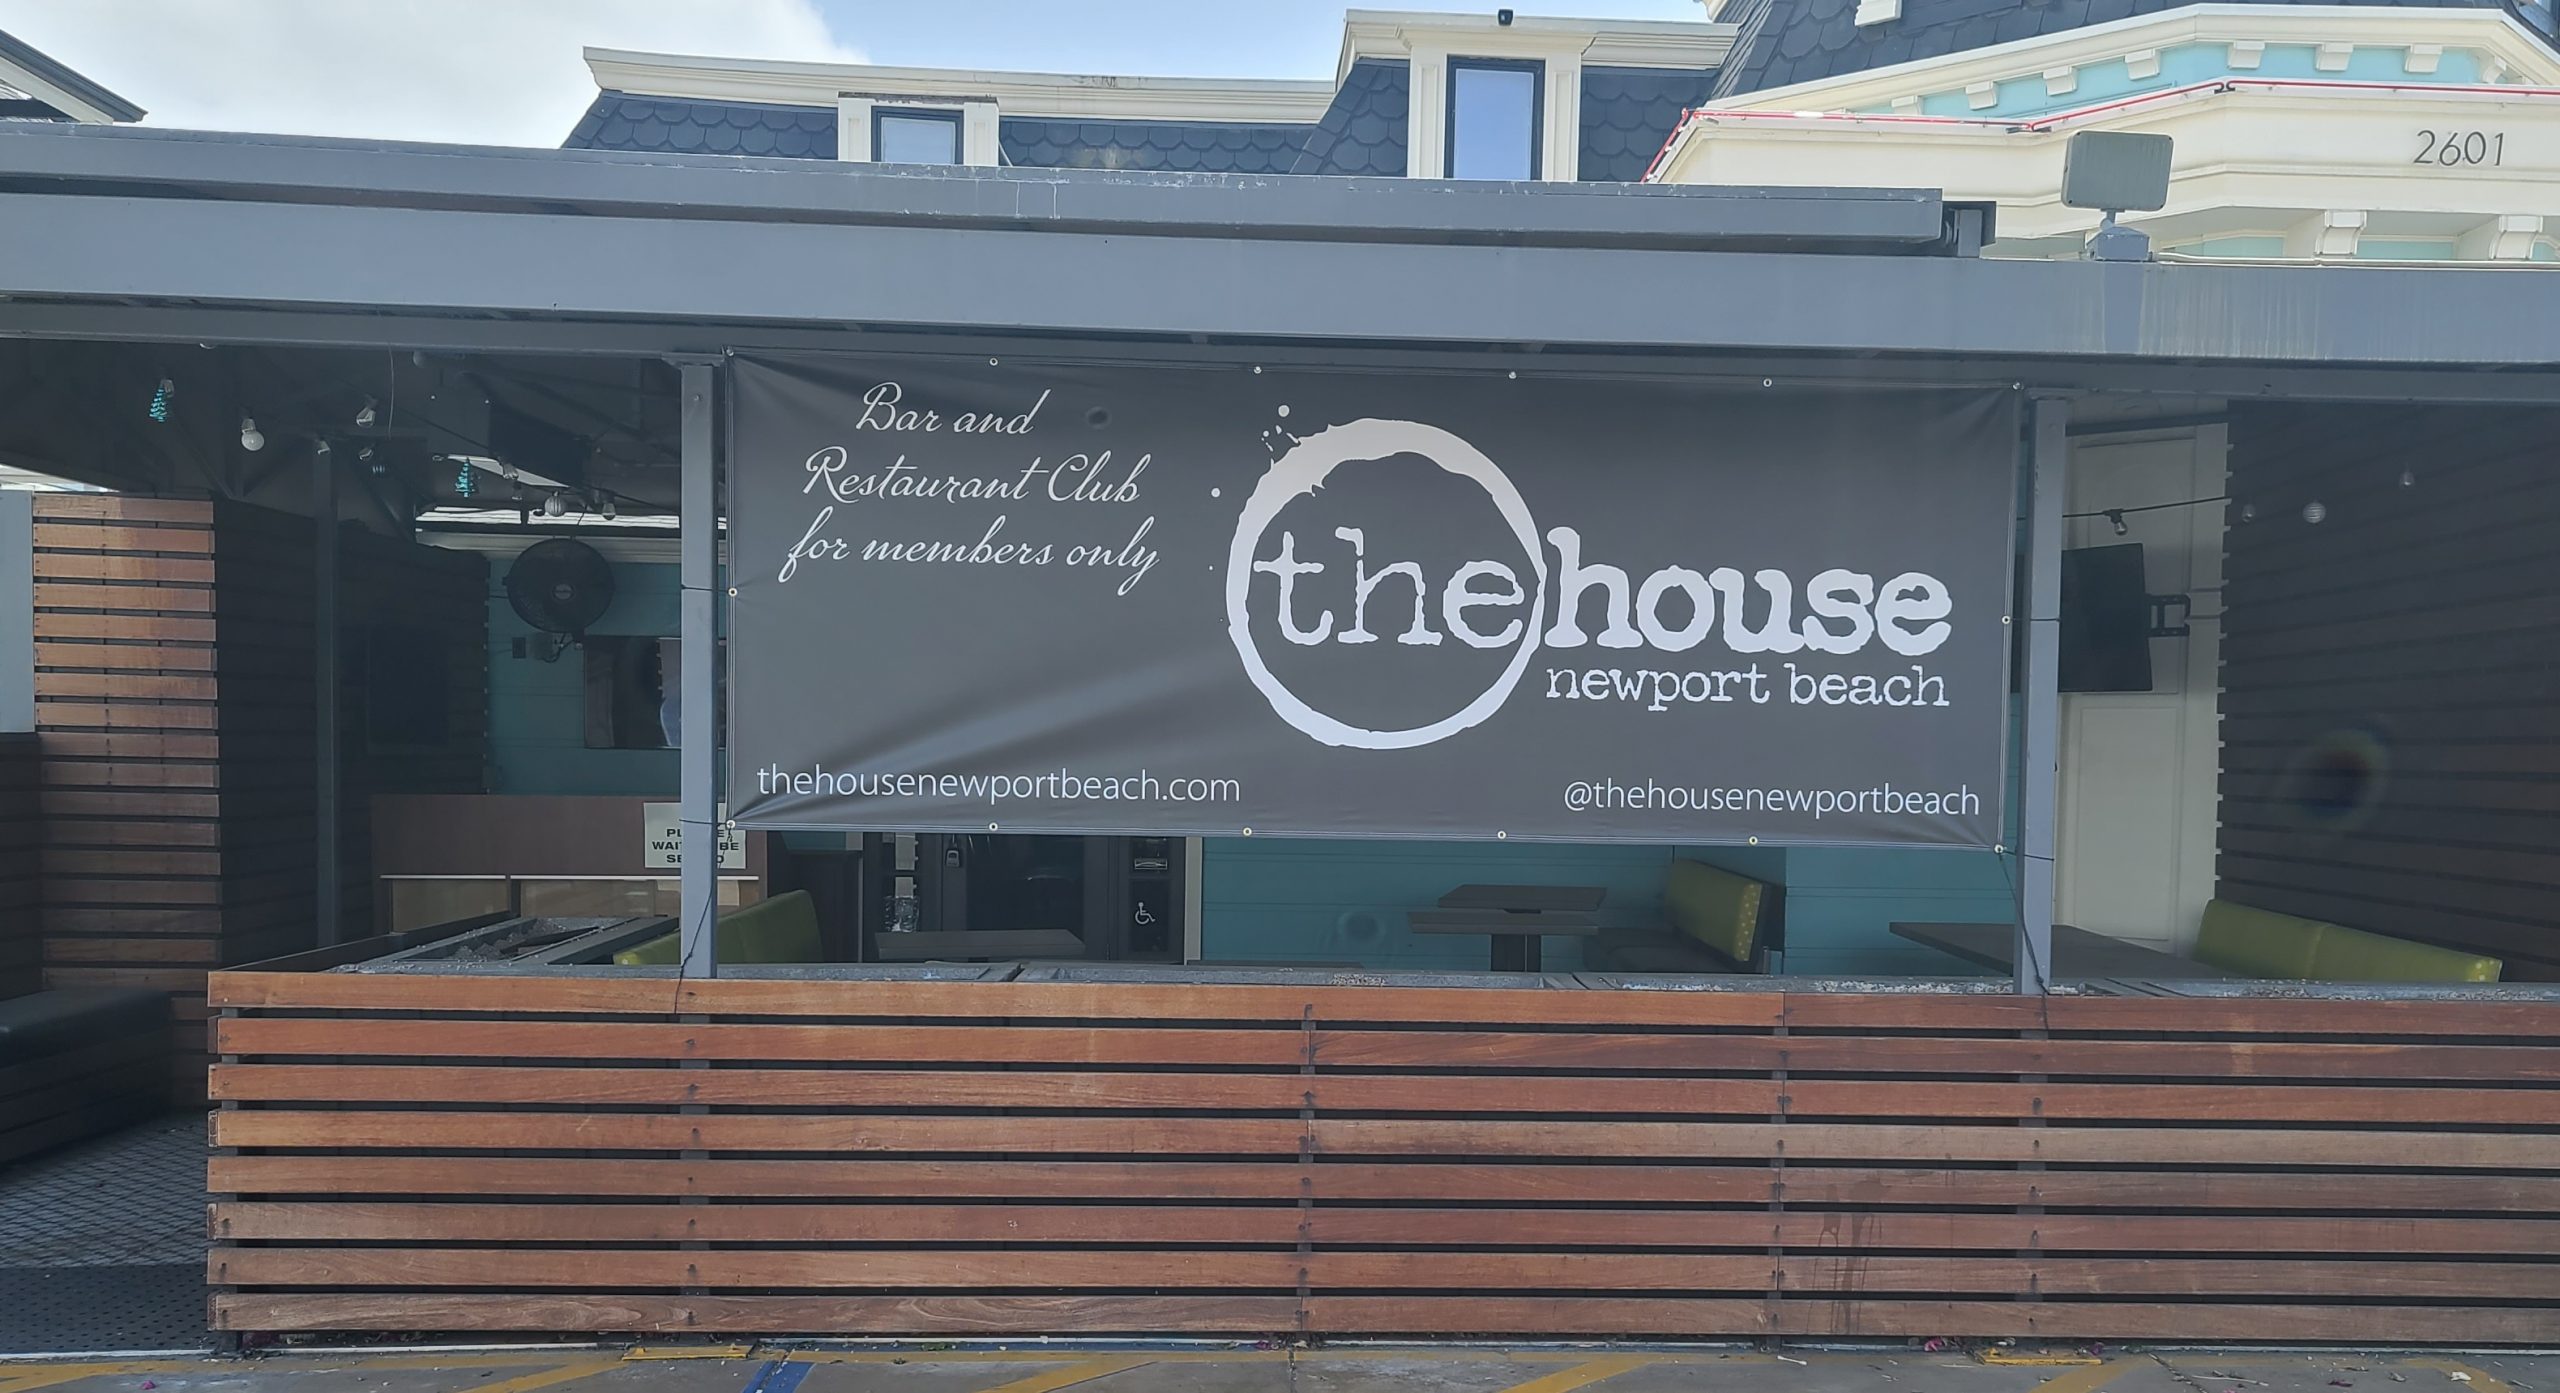 With this custom banner restaurant sign, The House Newport Beach can show off their members-only bar and restaurant club.